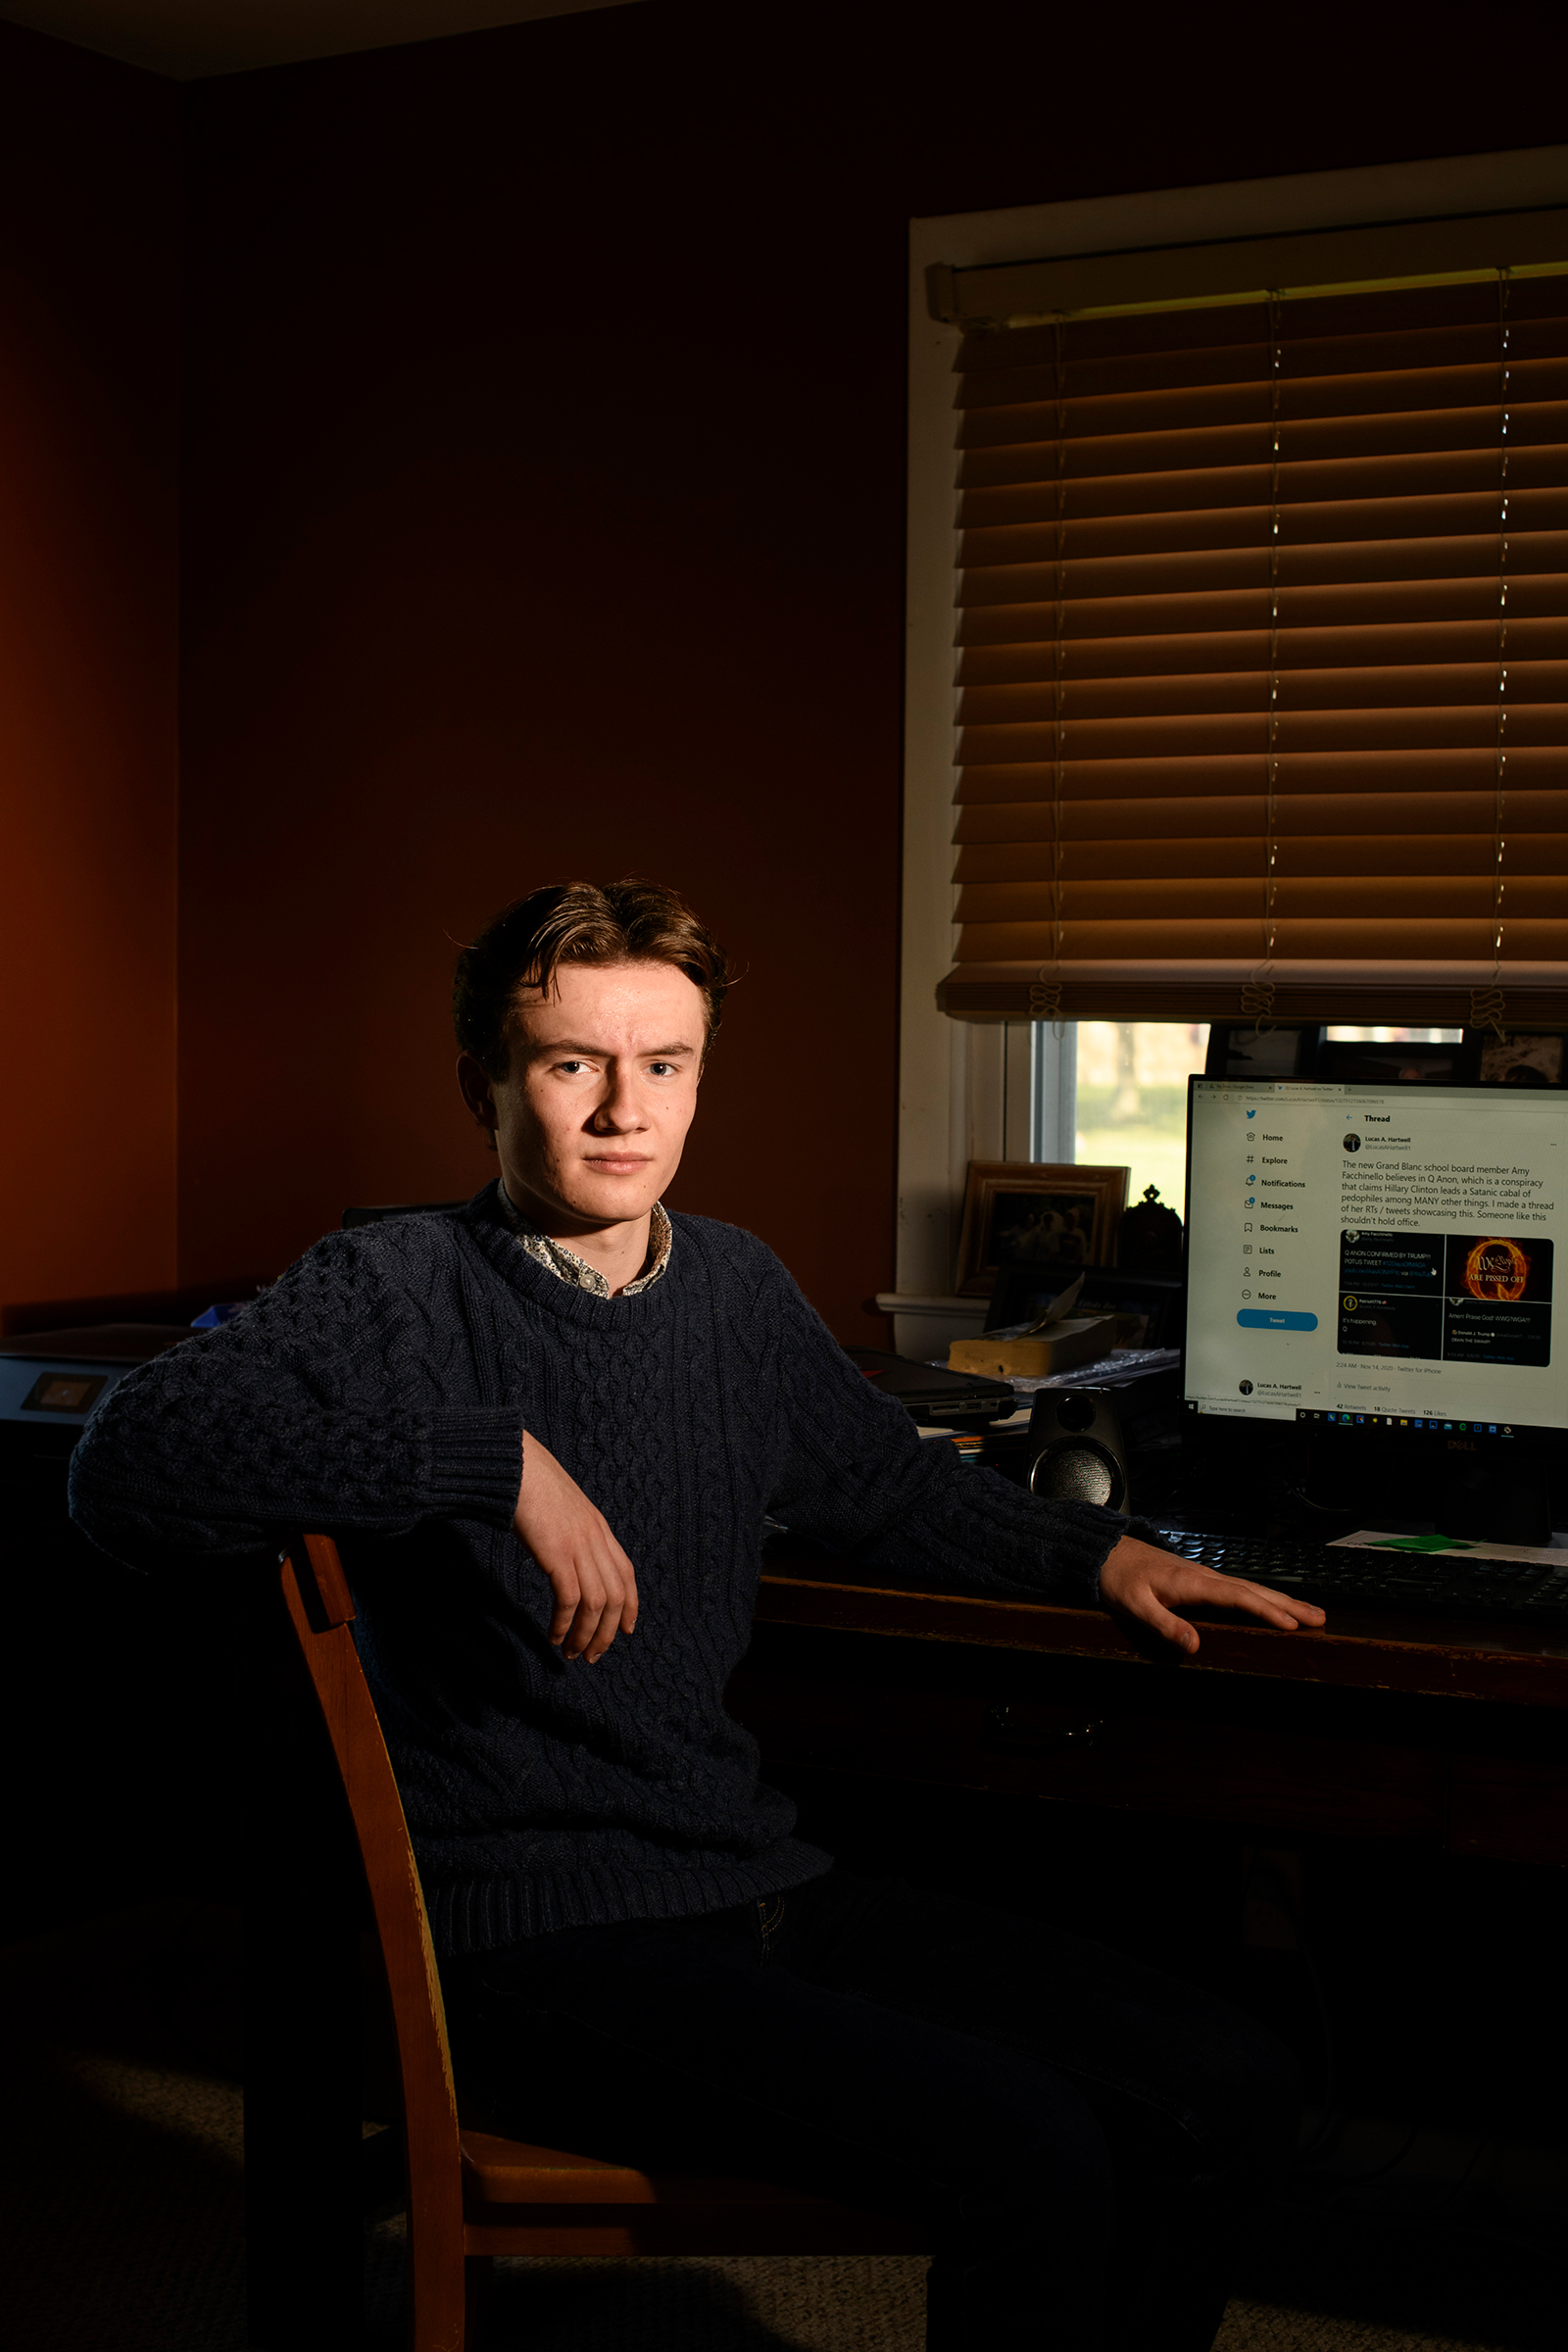 Lucas Hartwell, a senior at Grand Blanc Community High School, in the room he uses as his work space in Grand Blanc, Mich.